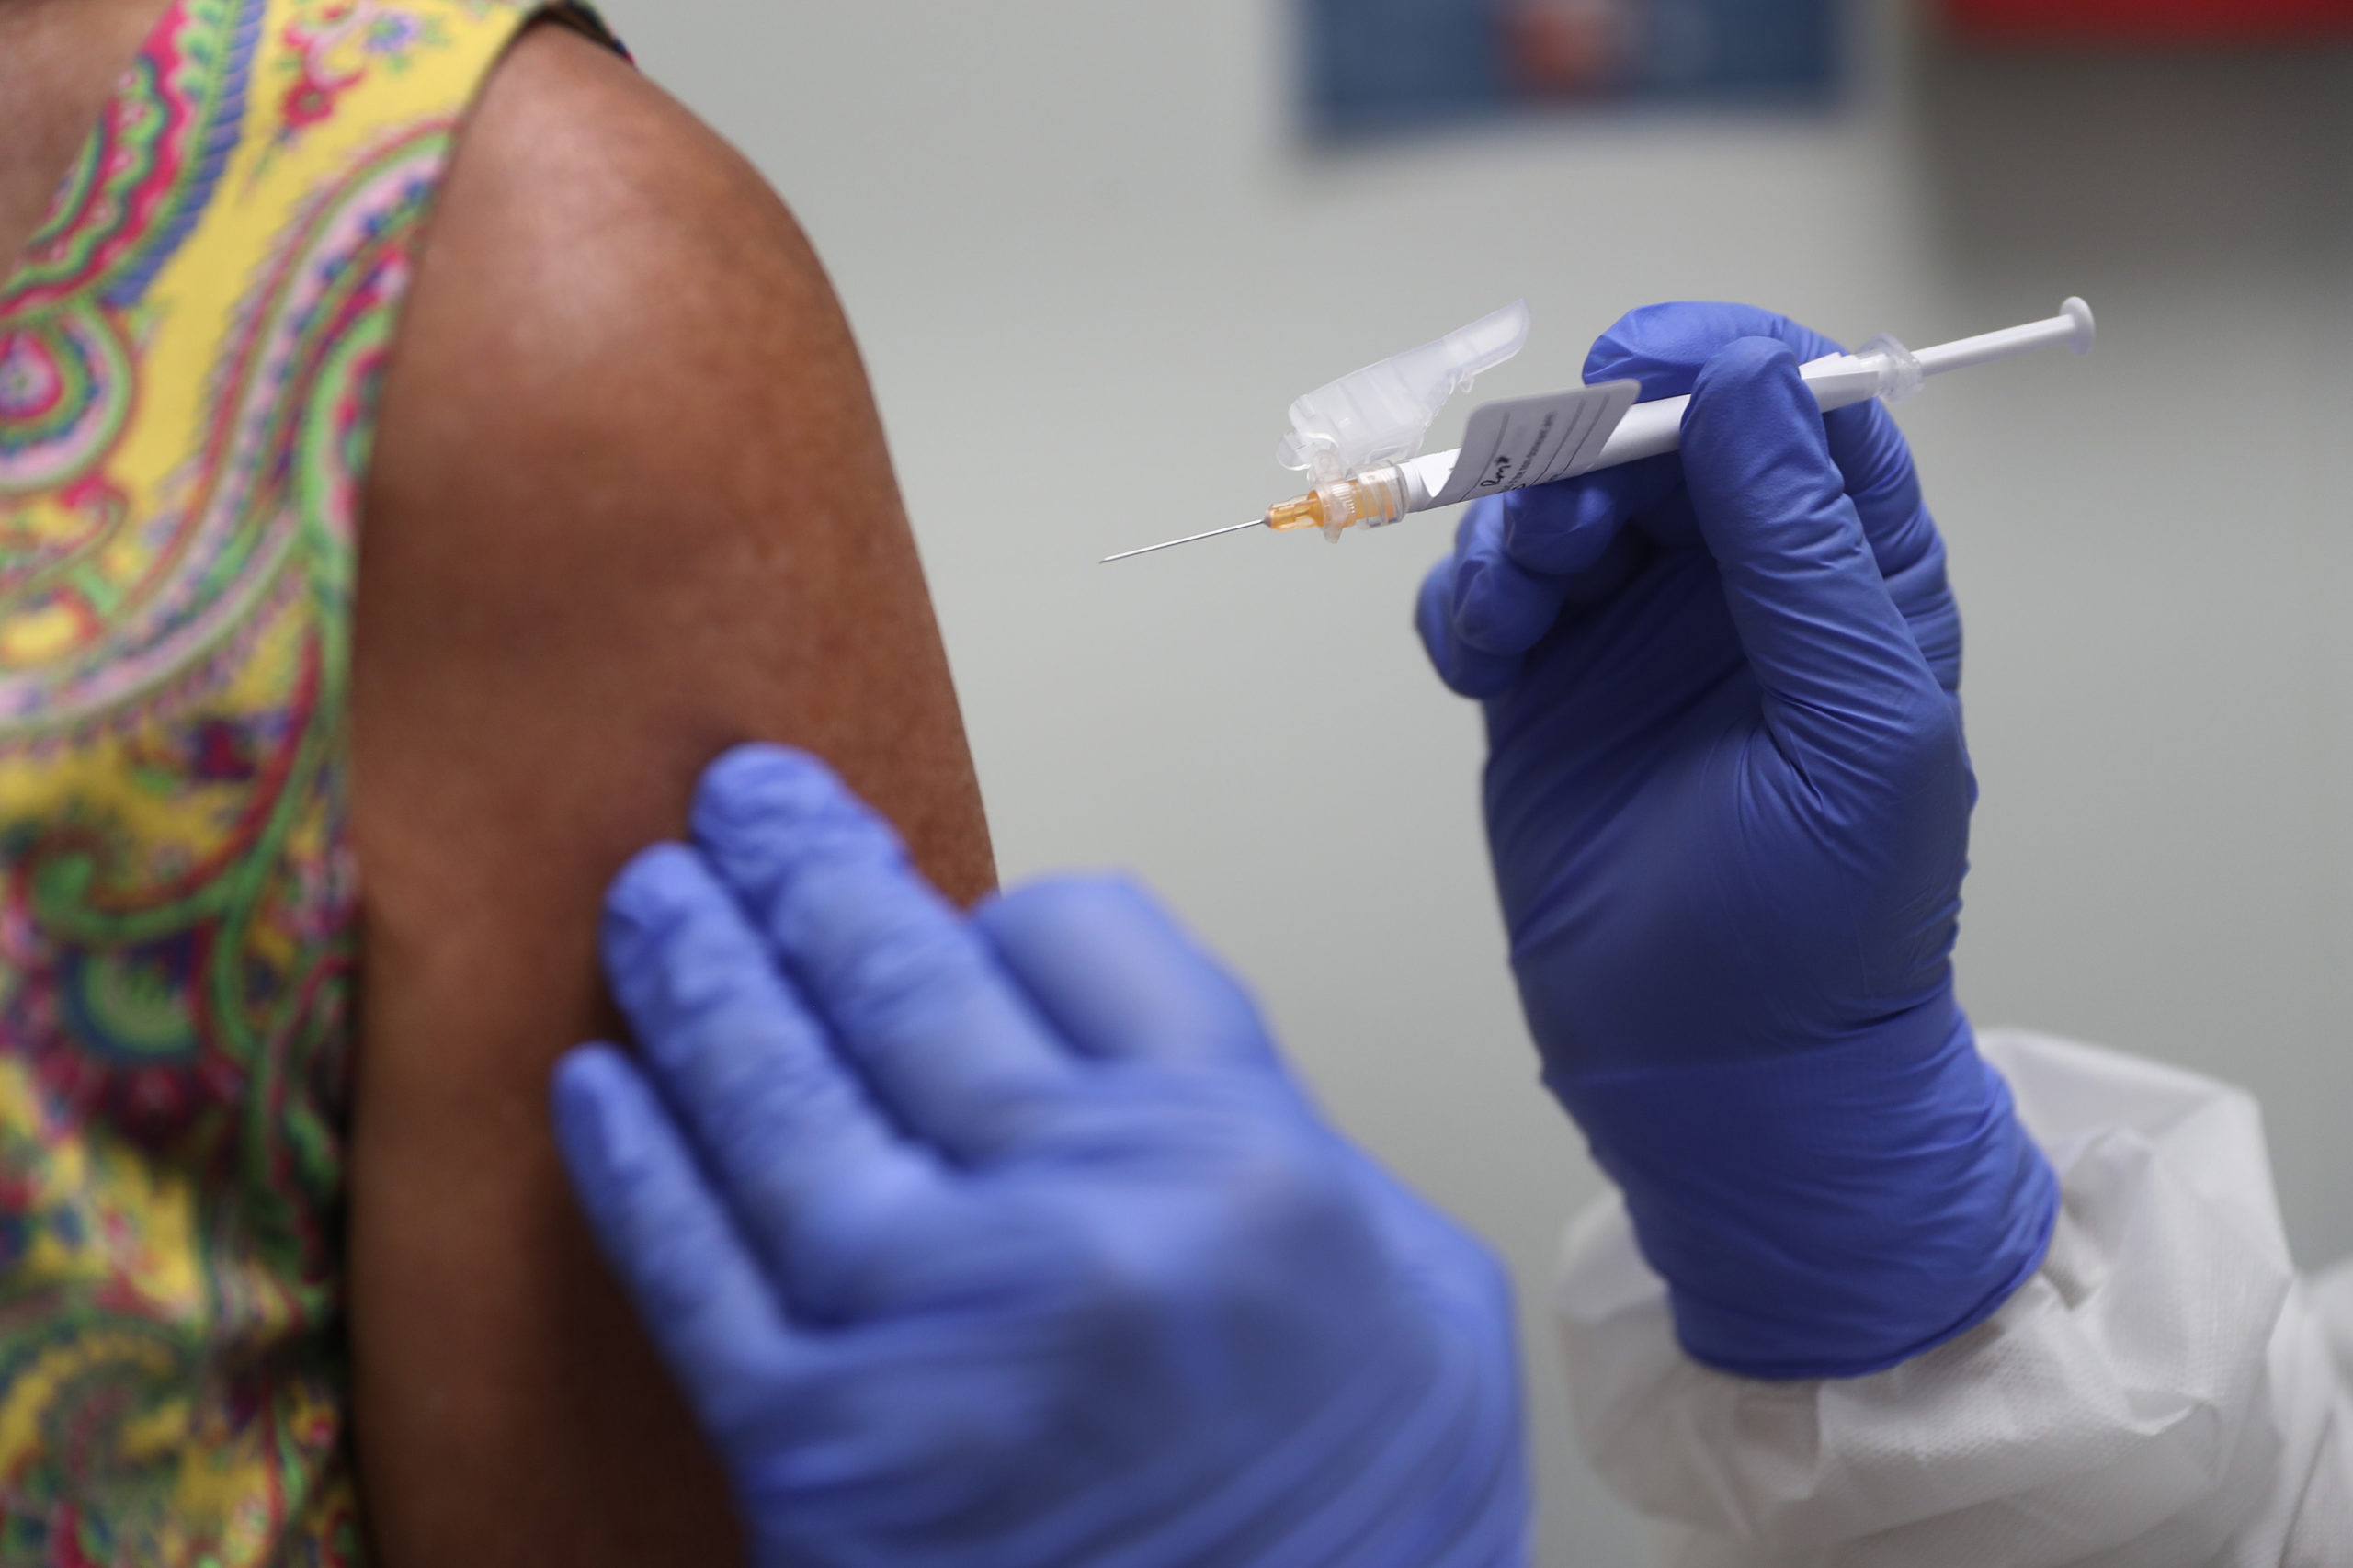 A volunteer receives a coronavirus vaccination at Research Centers of America on Aug. 7 in Florida. (Joe Raedle/Getty Images)